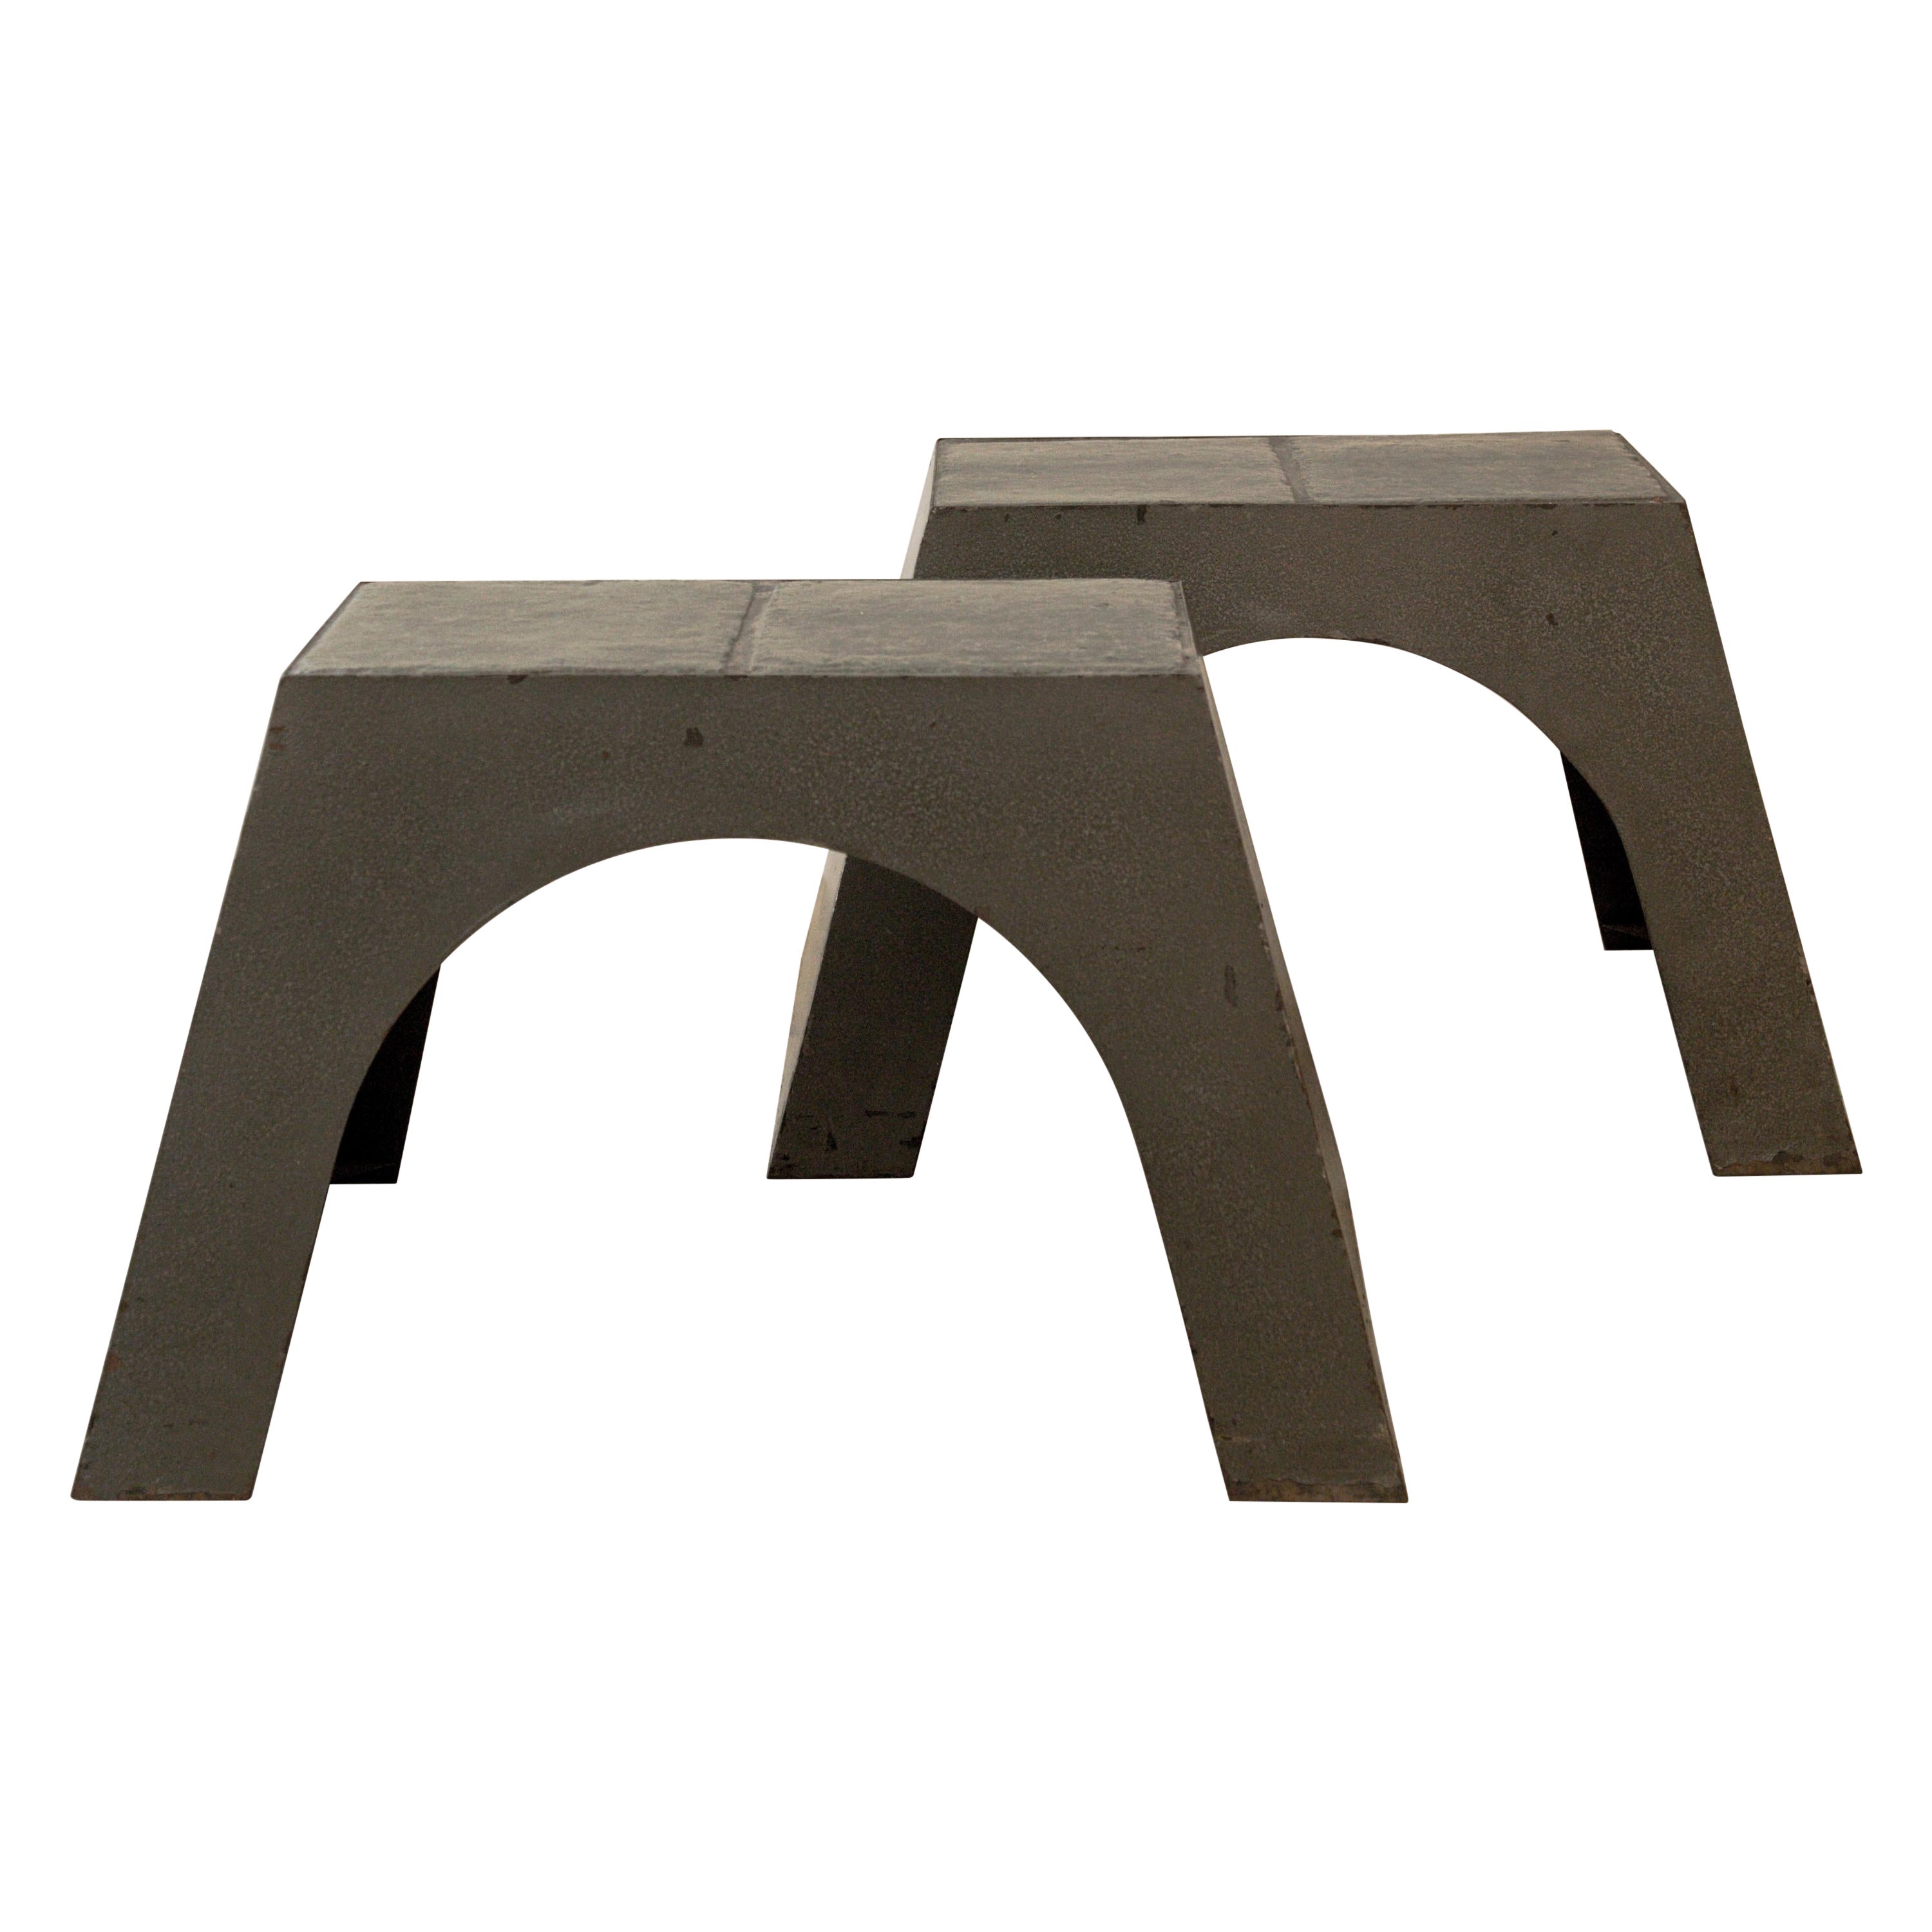 Steel + Tile Top Tables For Sale